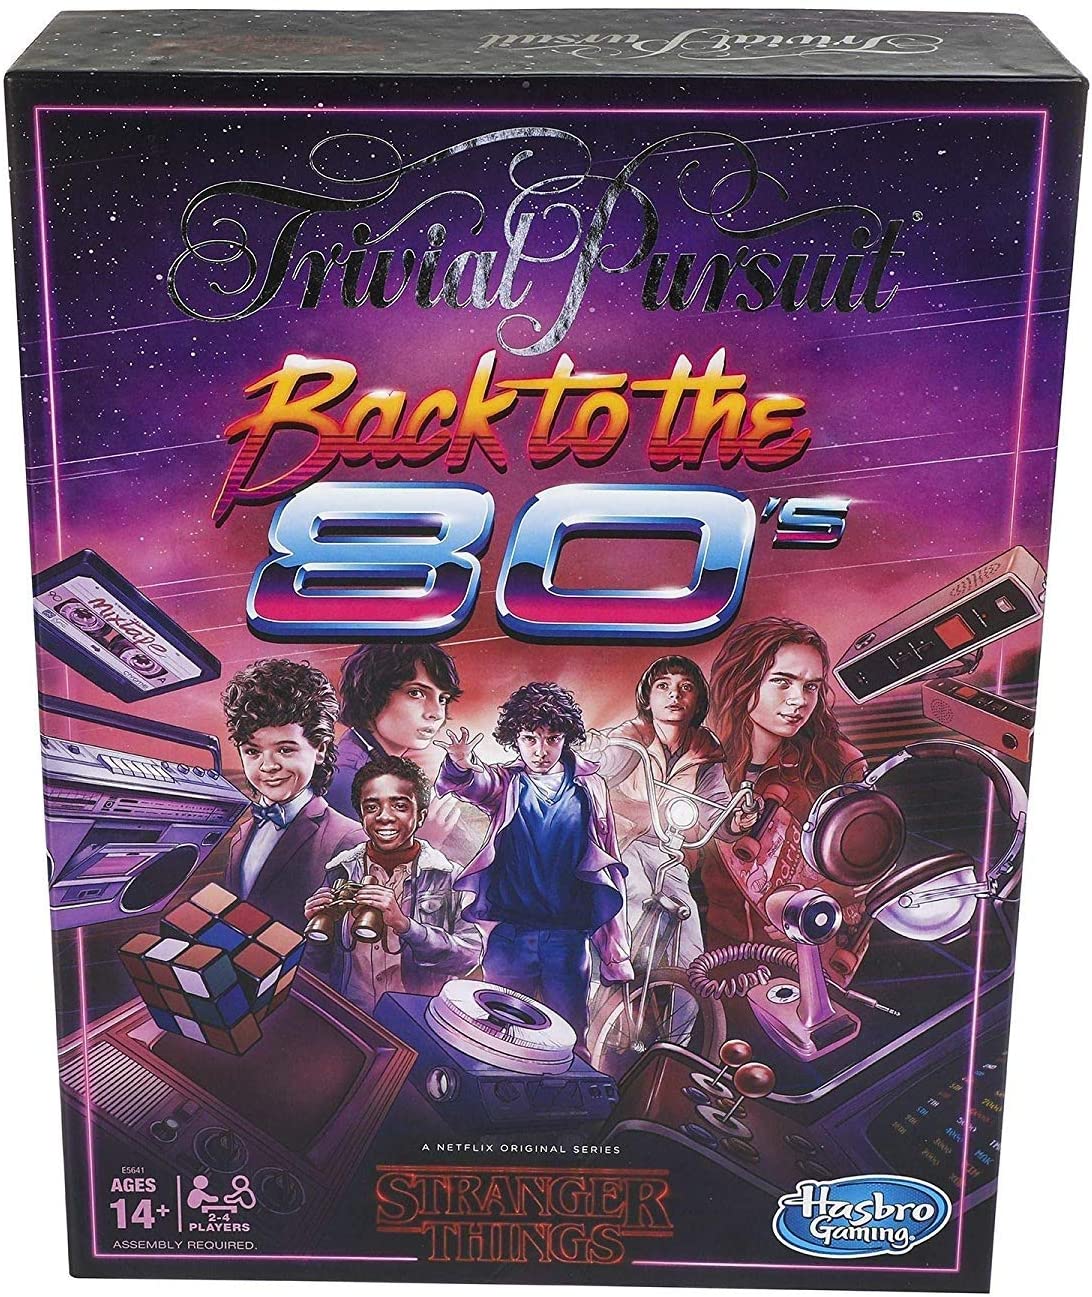 Trivial Pursuit - Stranger Things Back to the 80